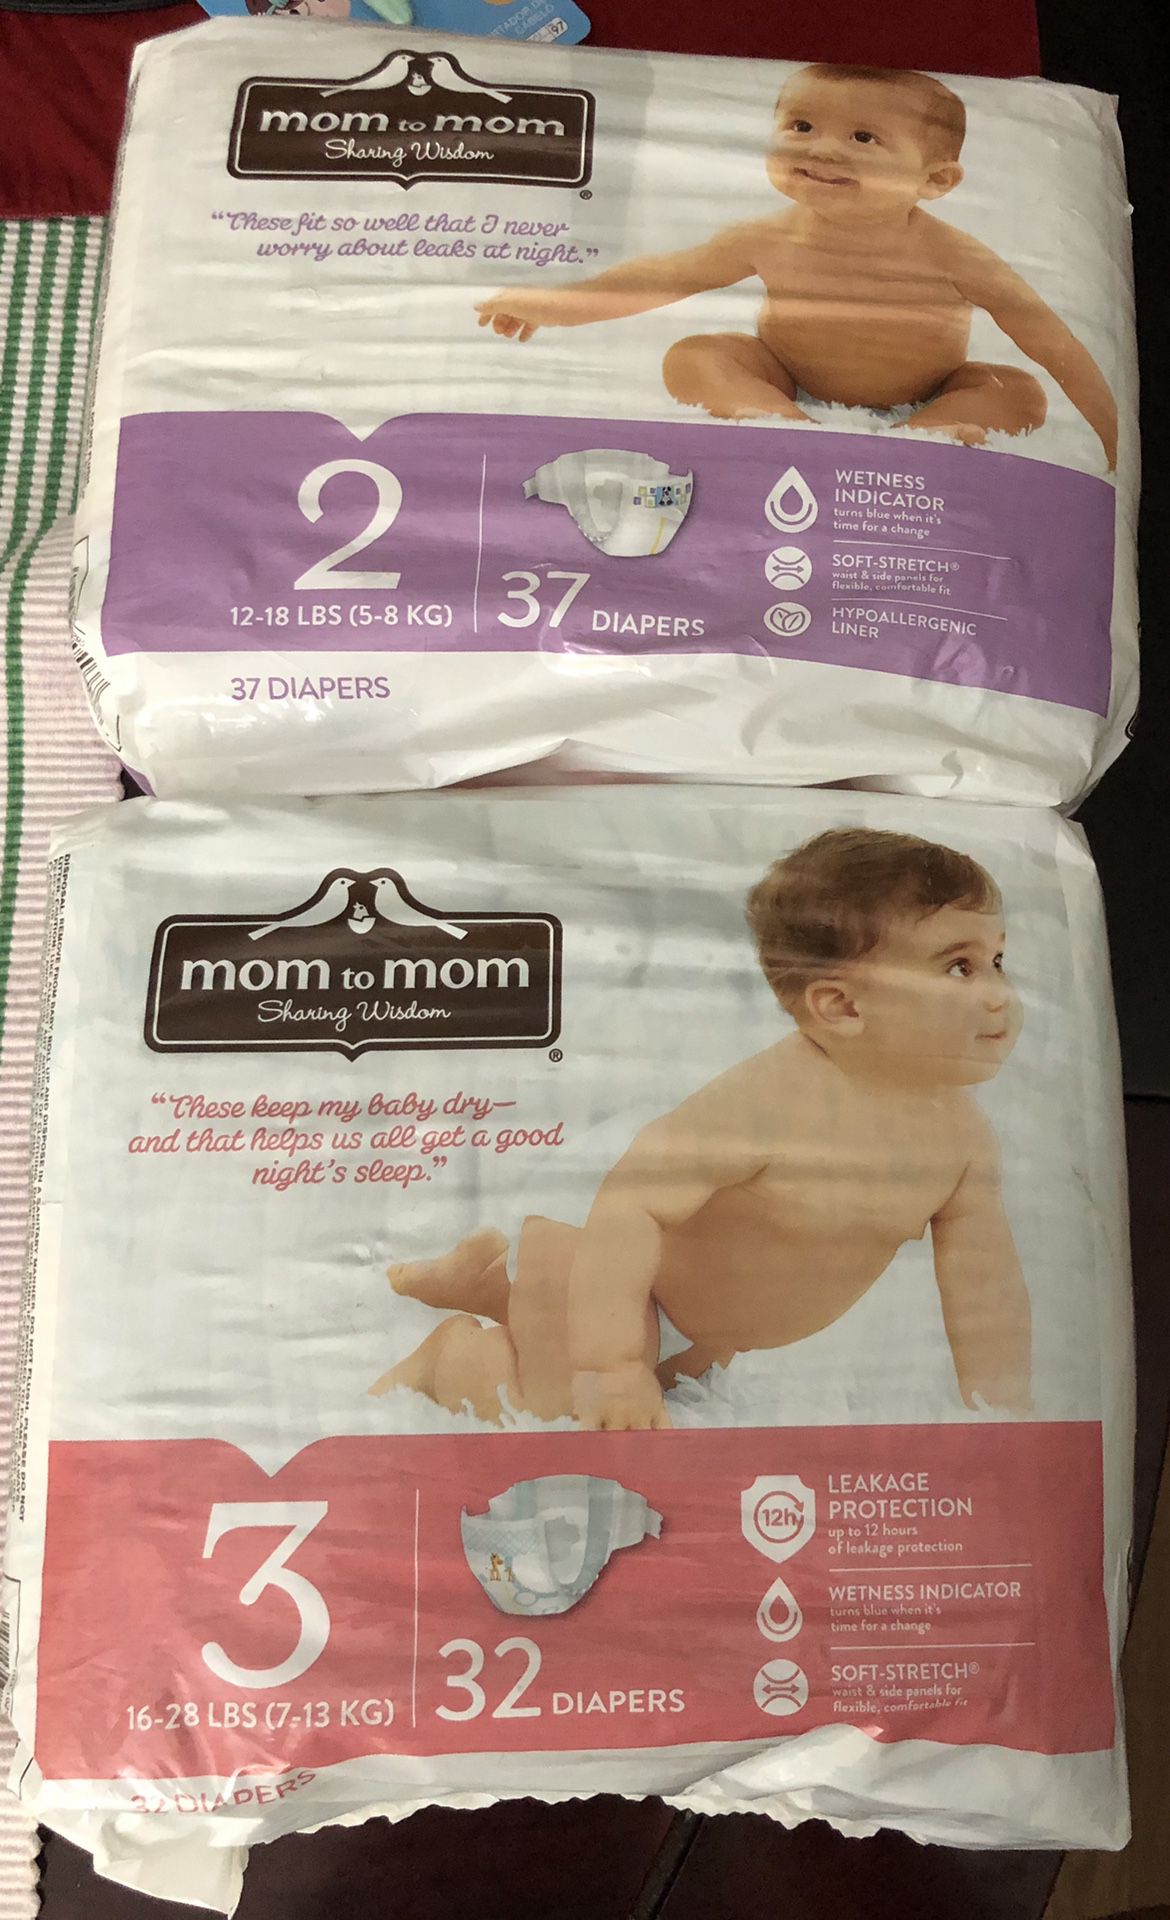 Mom to mom size 2 and 3 diapers